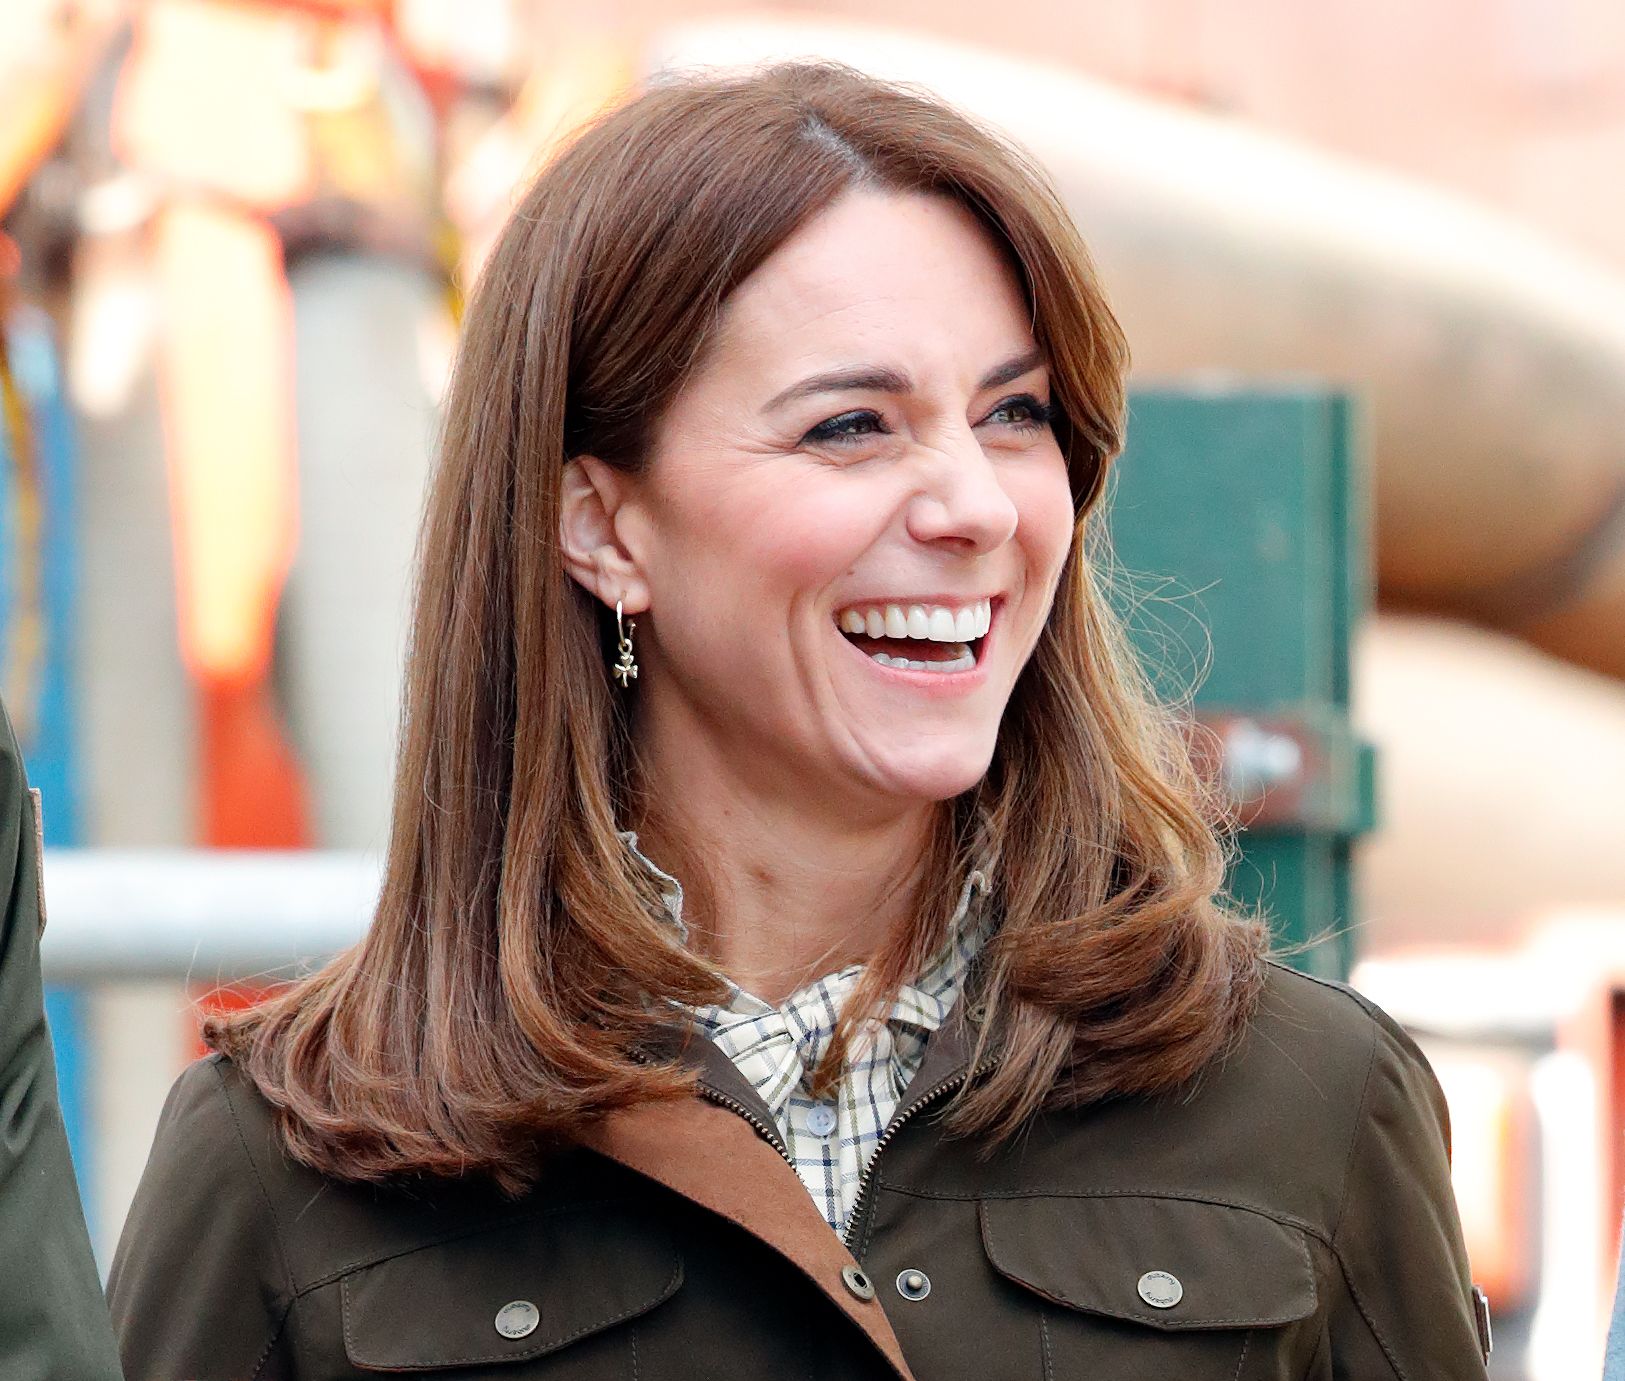 Kate Middleton's New Haircut Is Actually a Return to Her "Mum Fringe